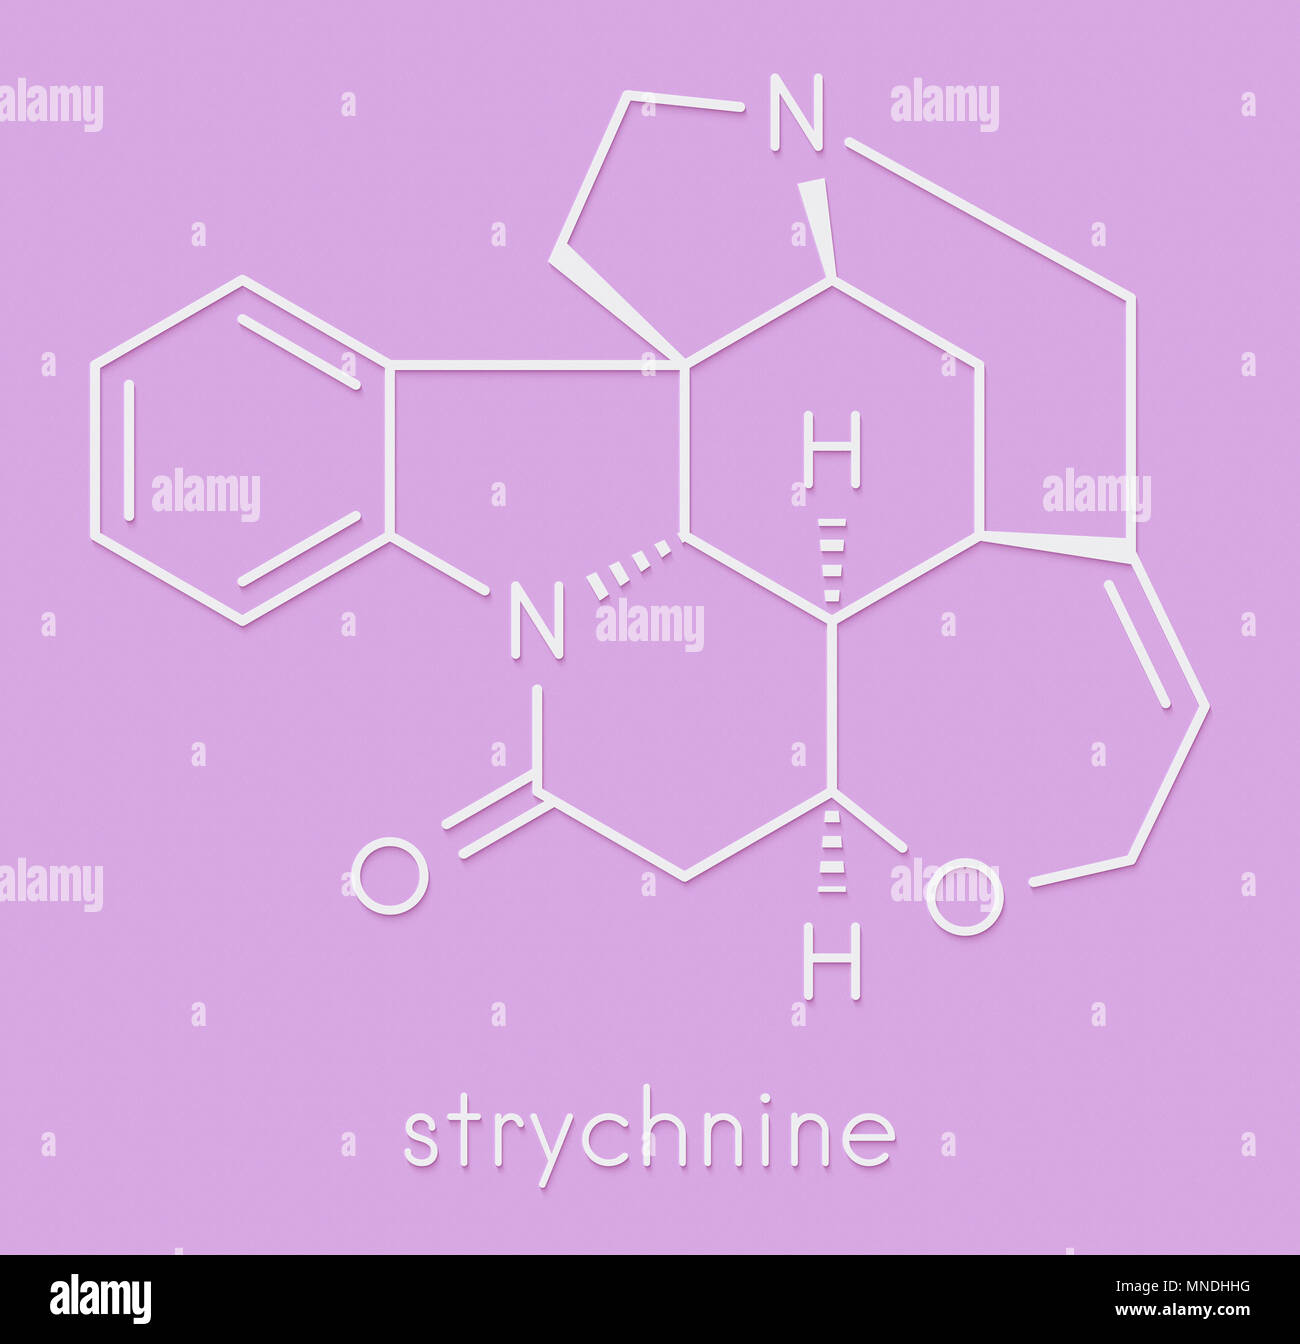 Strychnine poisonous alkaloid molecule. Isolated from Strychnos nux-vomica tree. Skeletal formula. Stock Photo